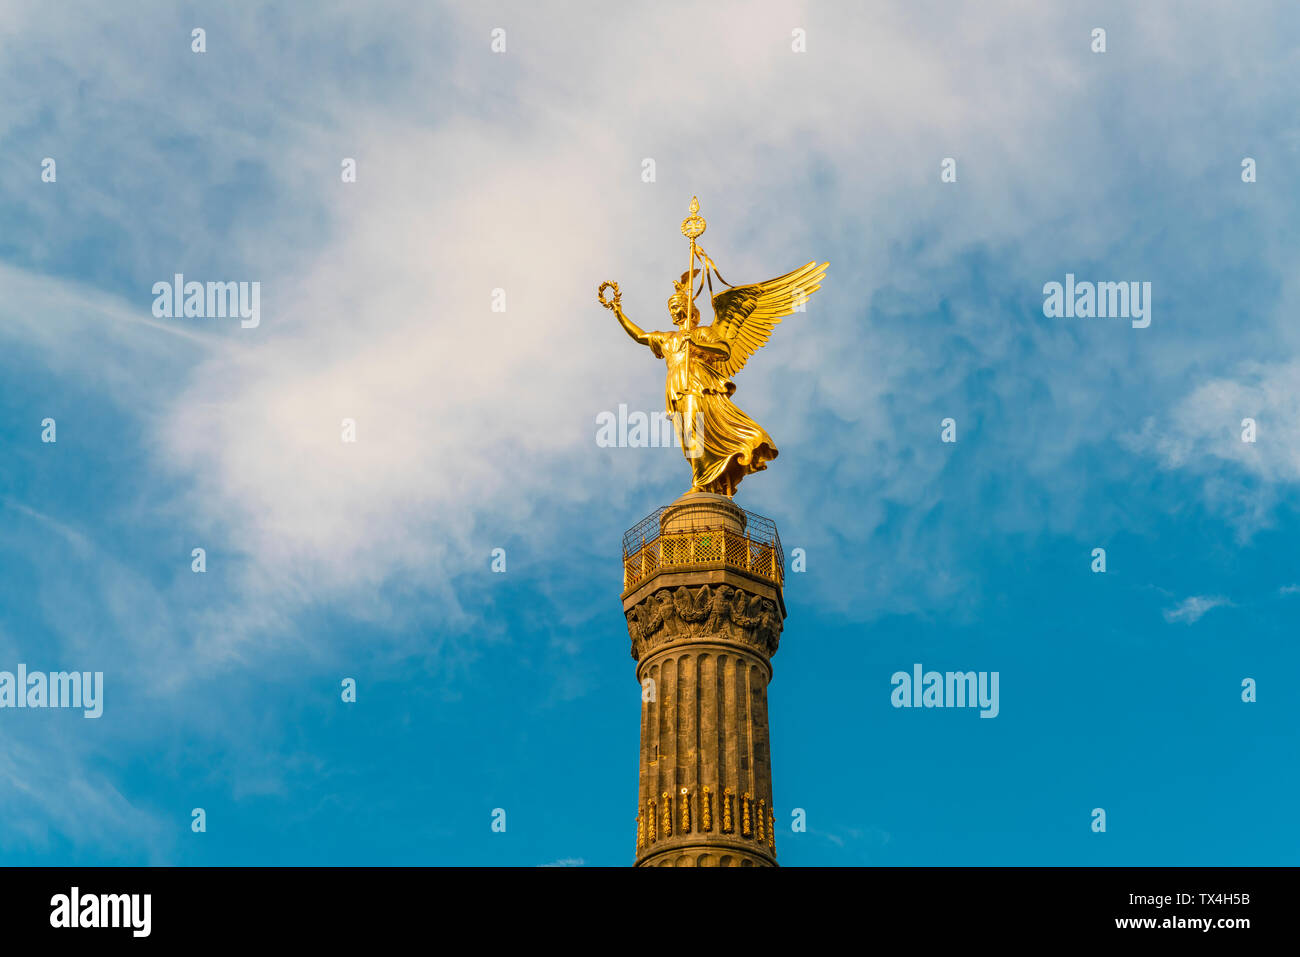 Germany, Berlin, view of victory column Stock Photo